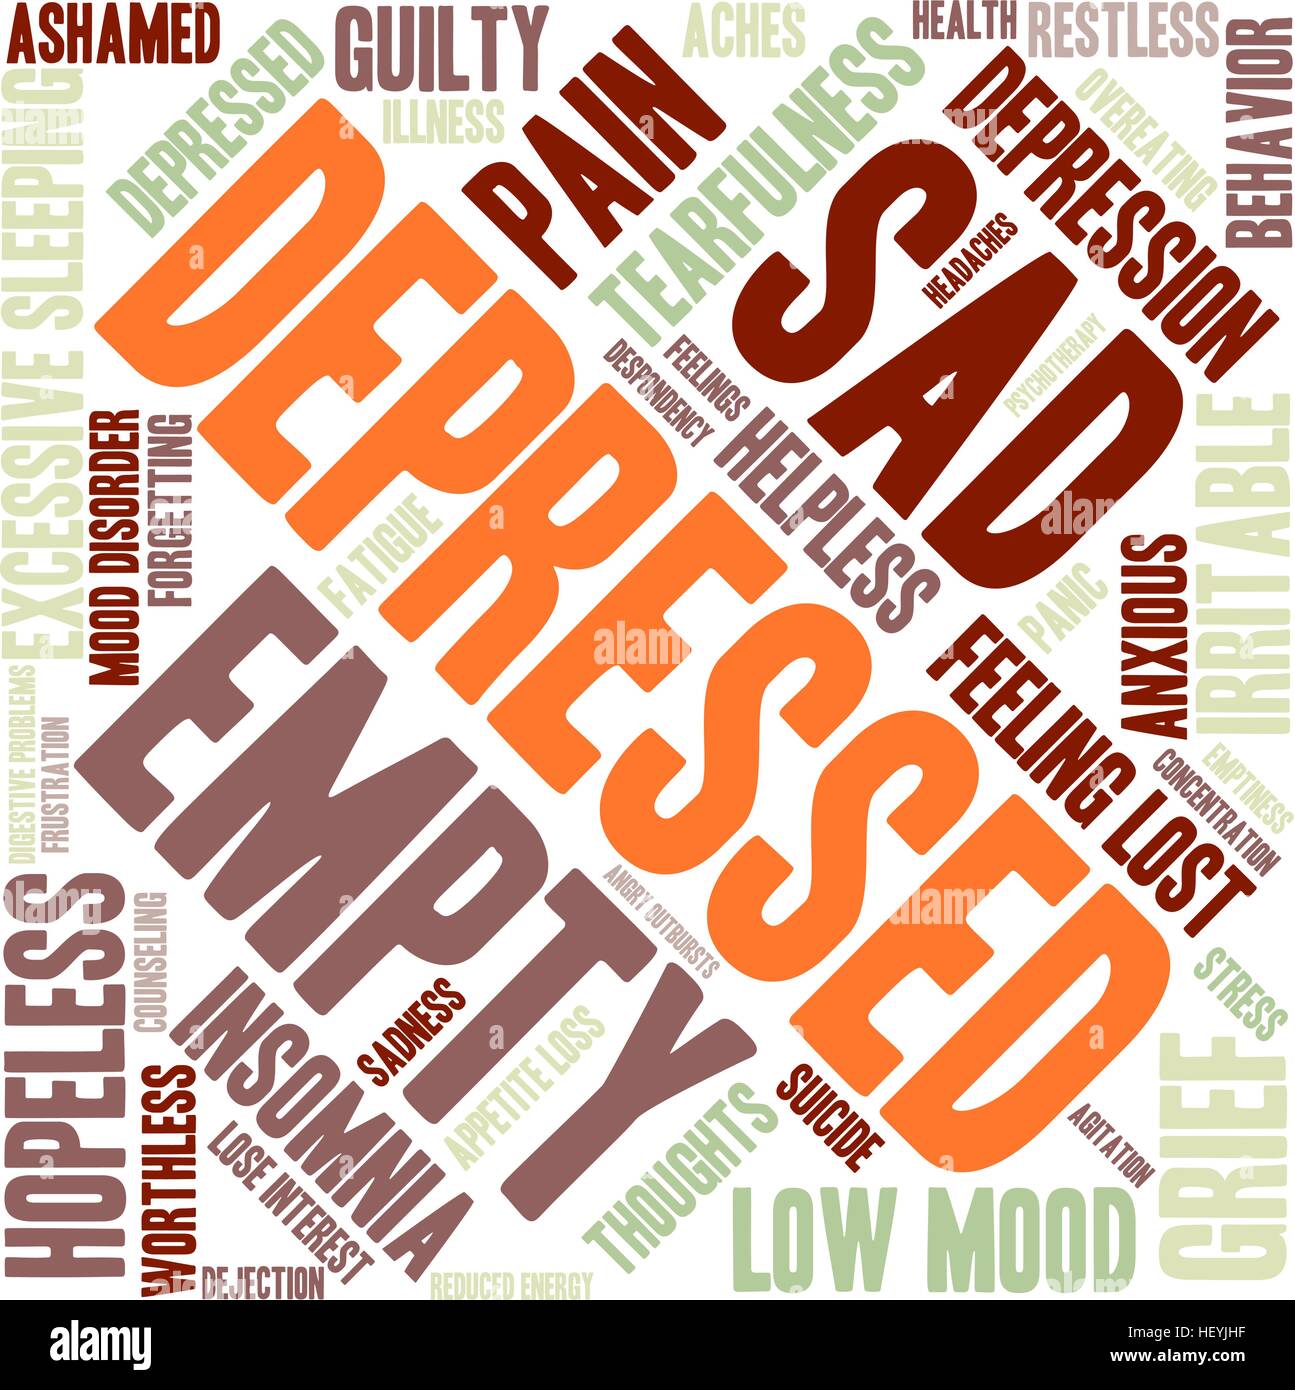 Depressed word cloud on a white background. Stock Vector